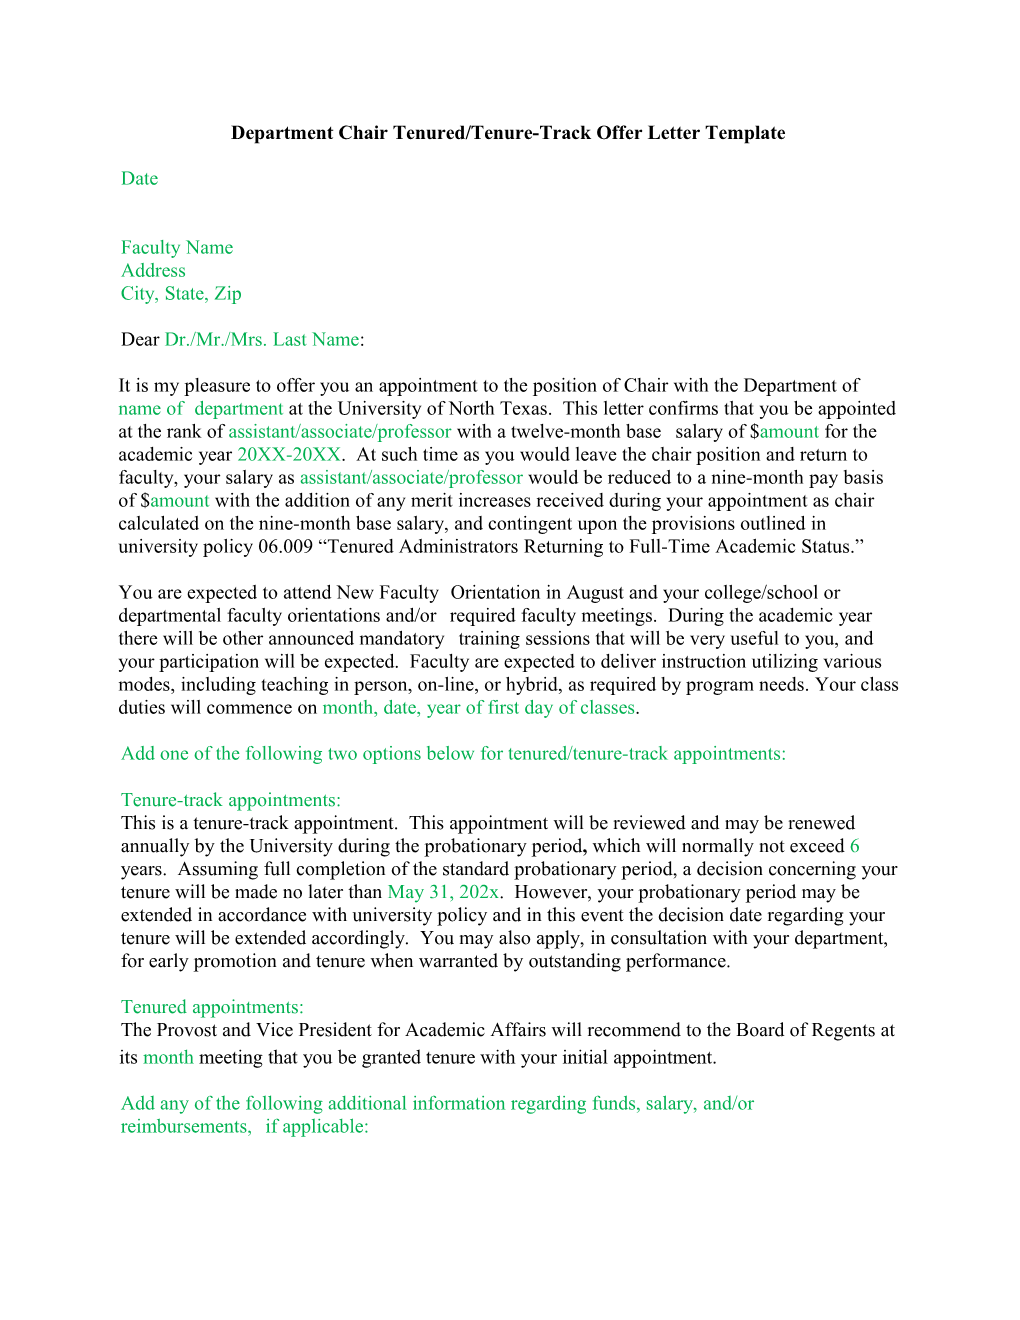 Department Chair Tenured/Tenure-Trackoffer Letter Template